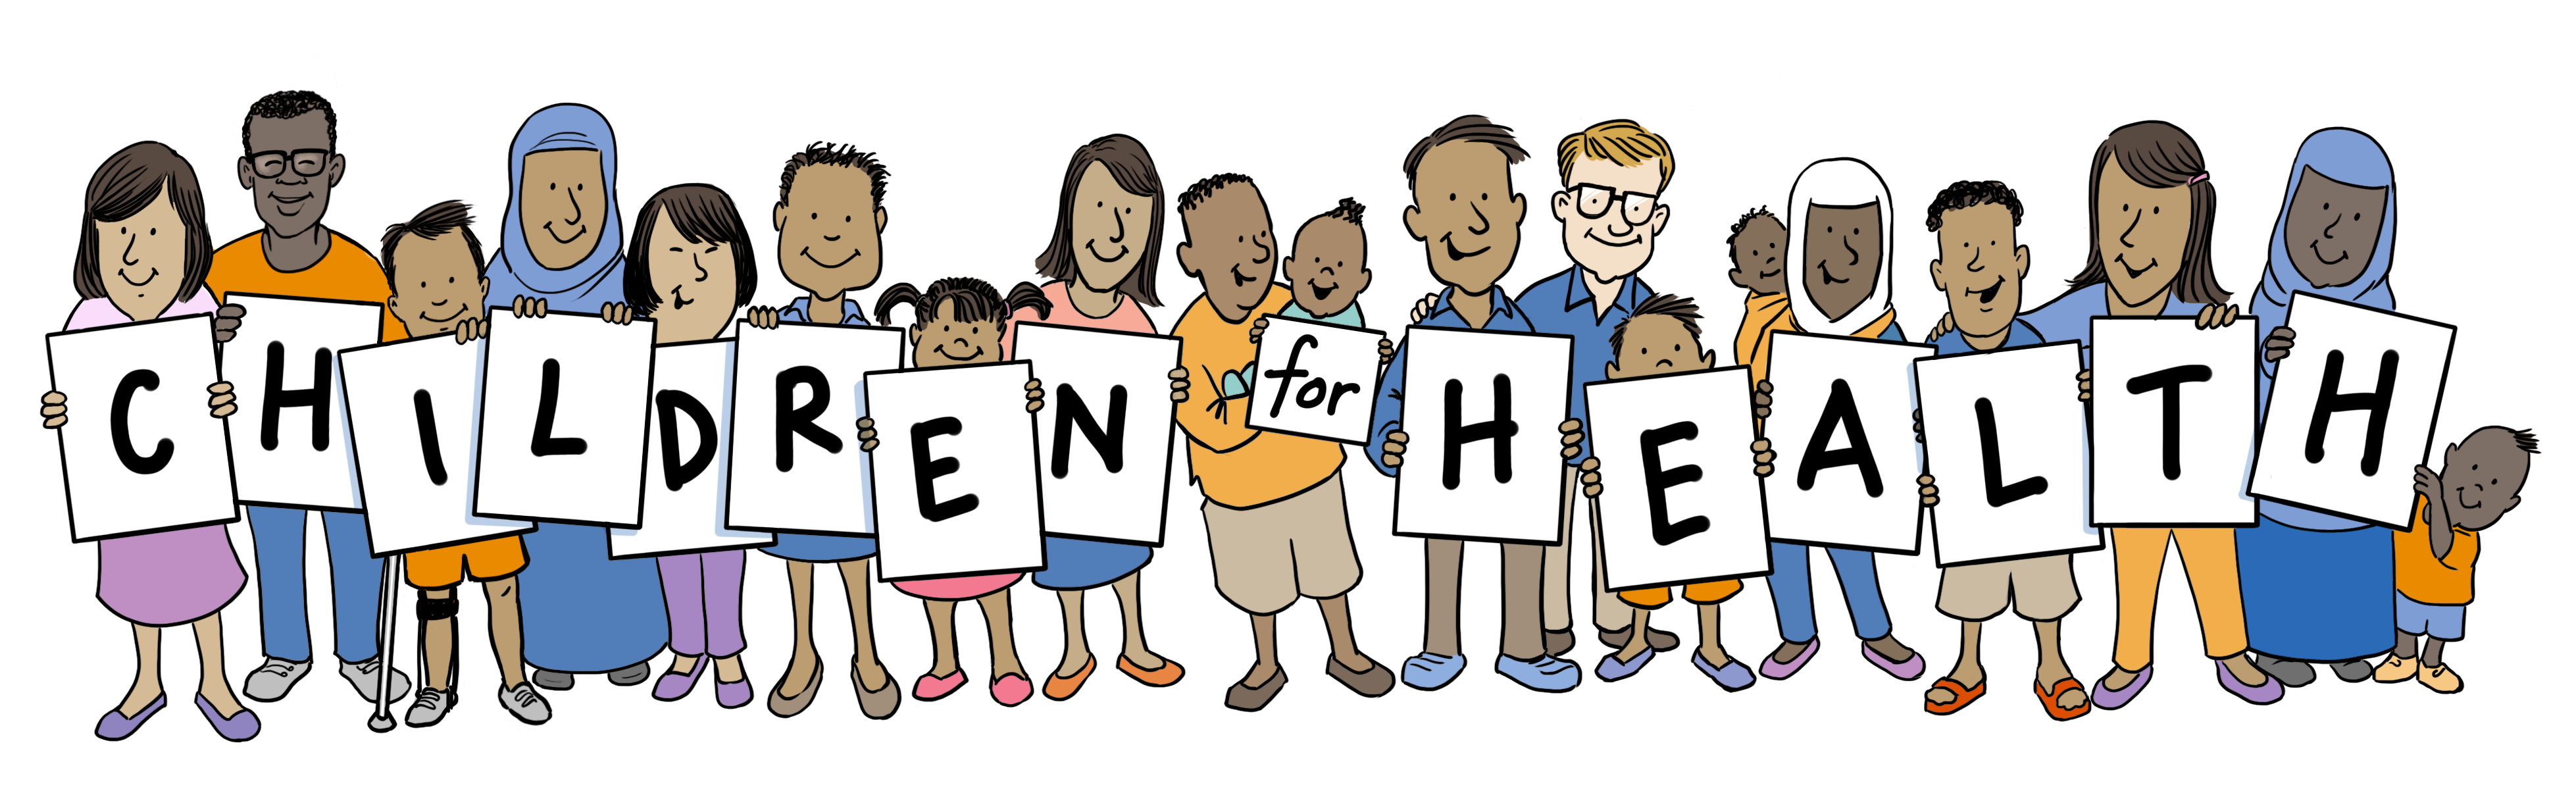 Illustration of a group of people holding posters with letters that spell out Children for Health